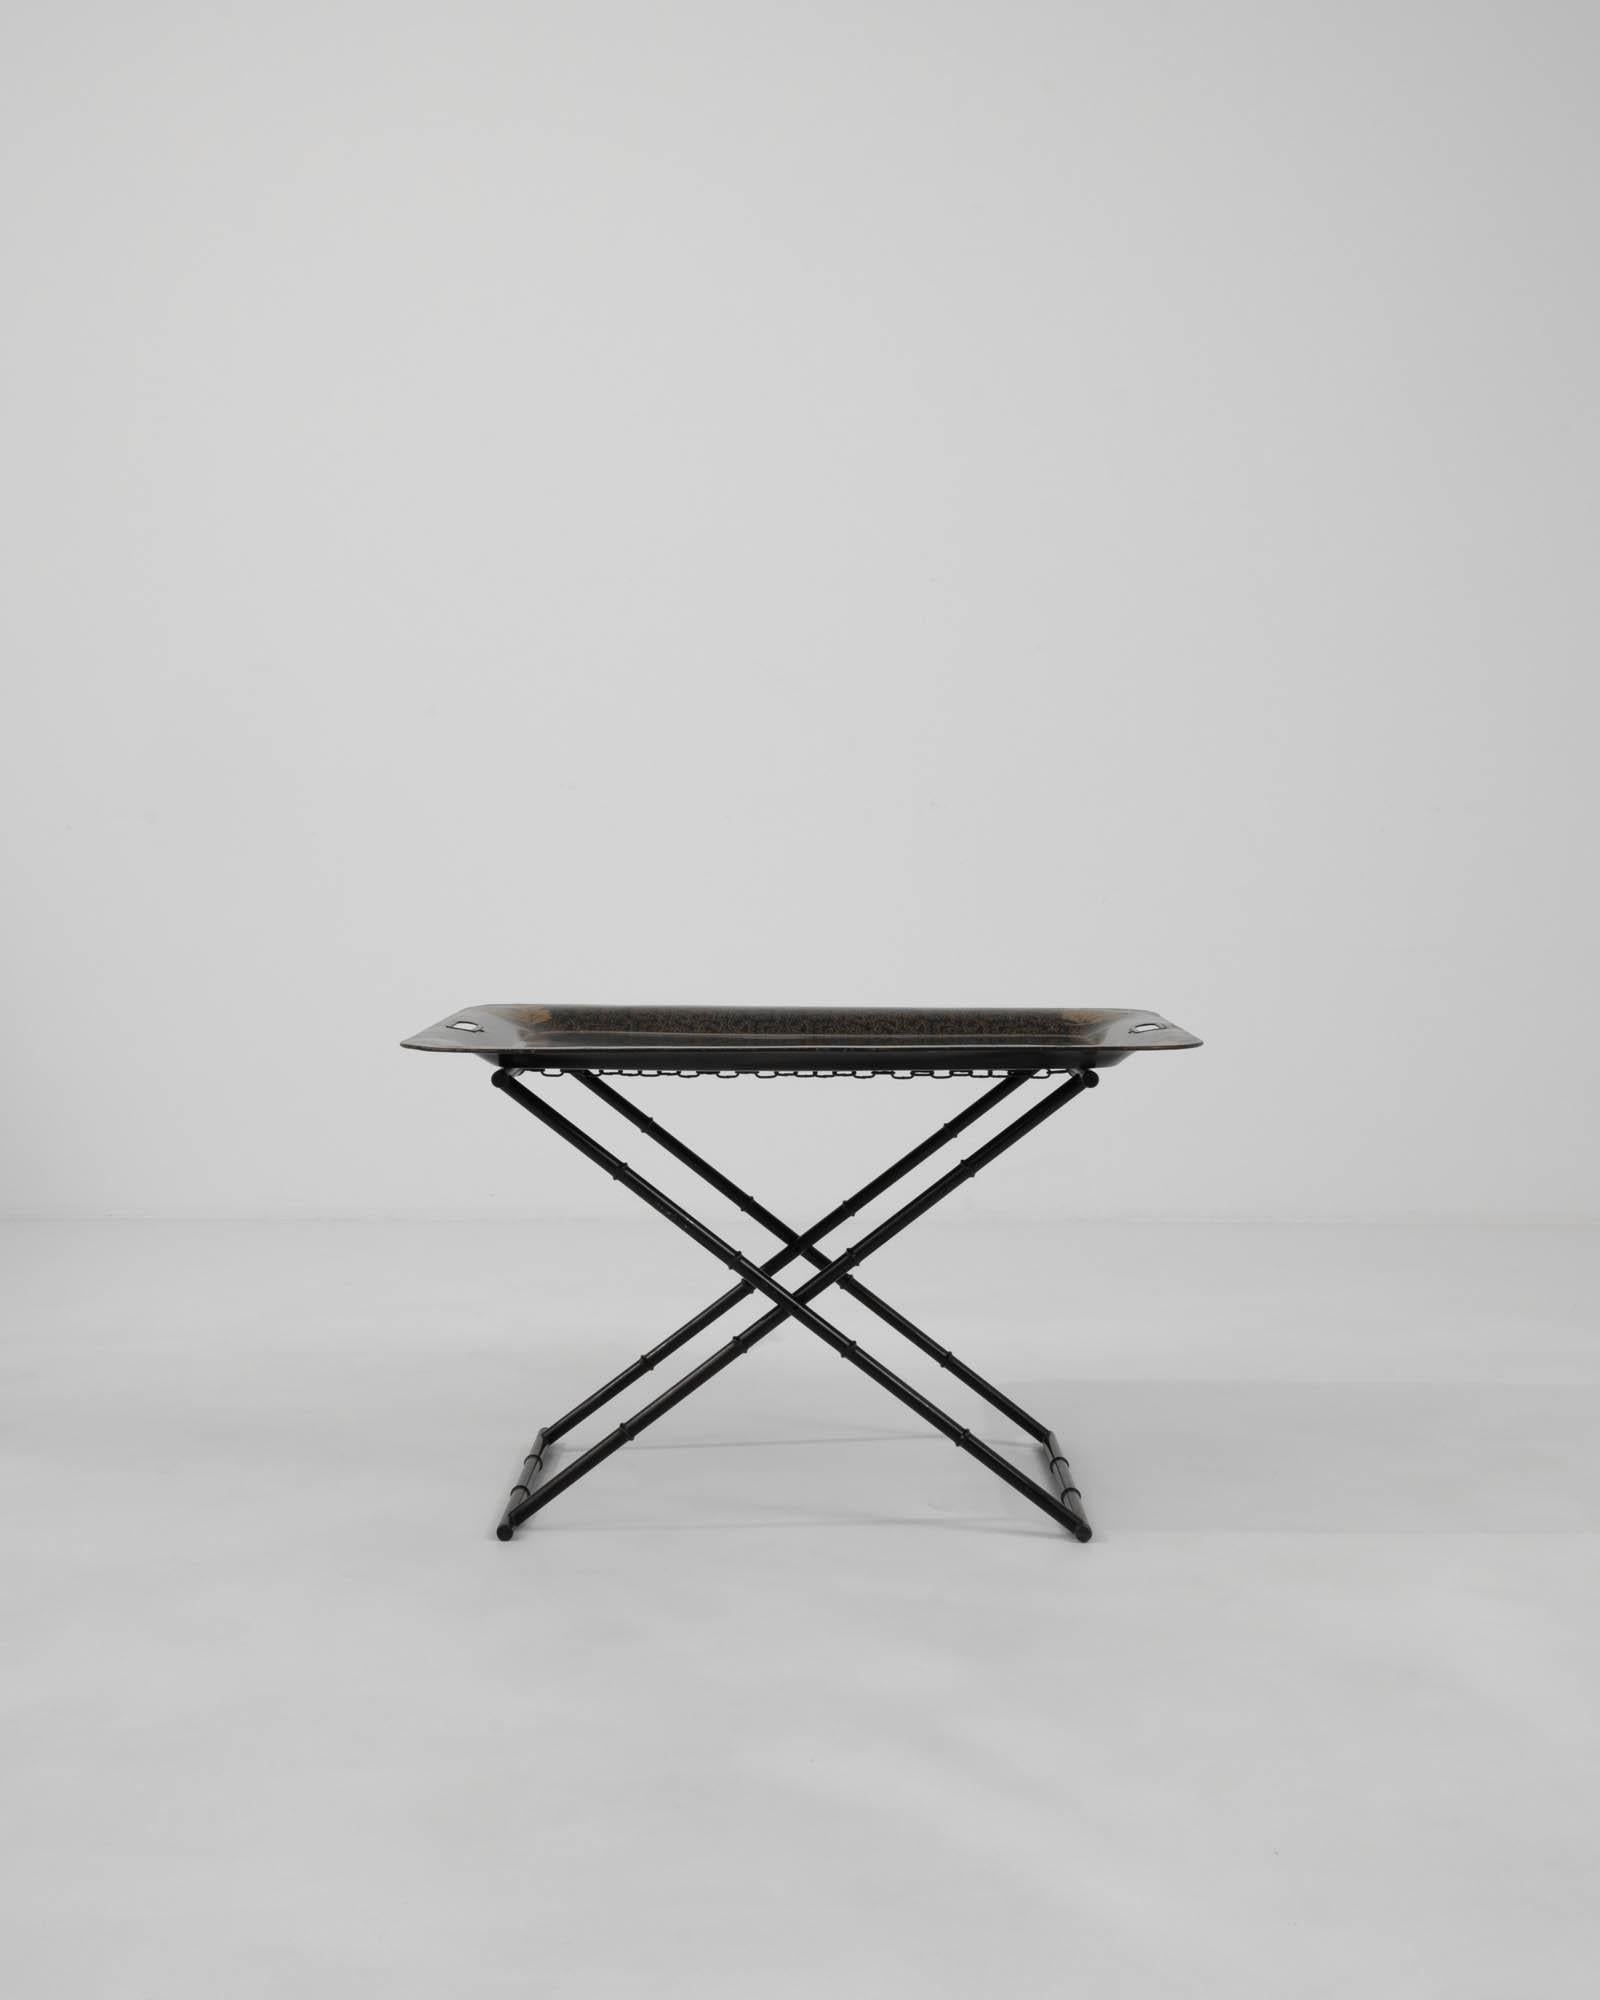 Introducing the quintessence of French ingenuity and 20th-century design, this Metal Folding Coffee Table combines practicality with an artistic flair. The sleek, black metal frame is engineered for both strength and elegance, featuring a